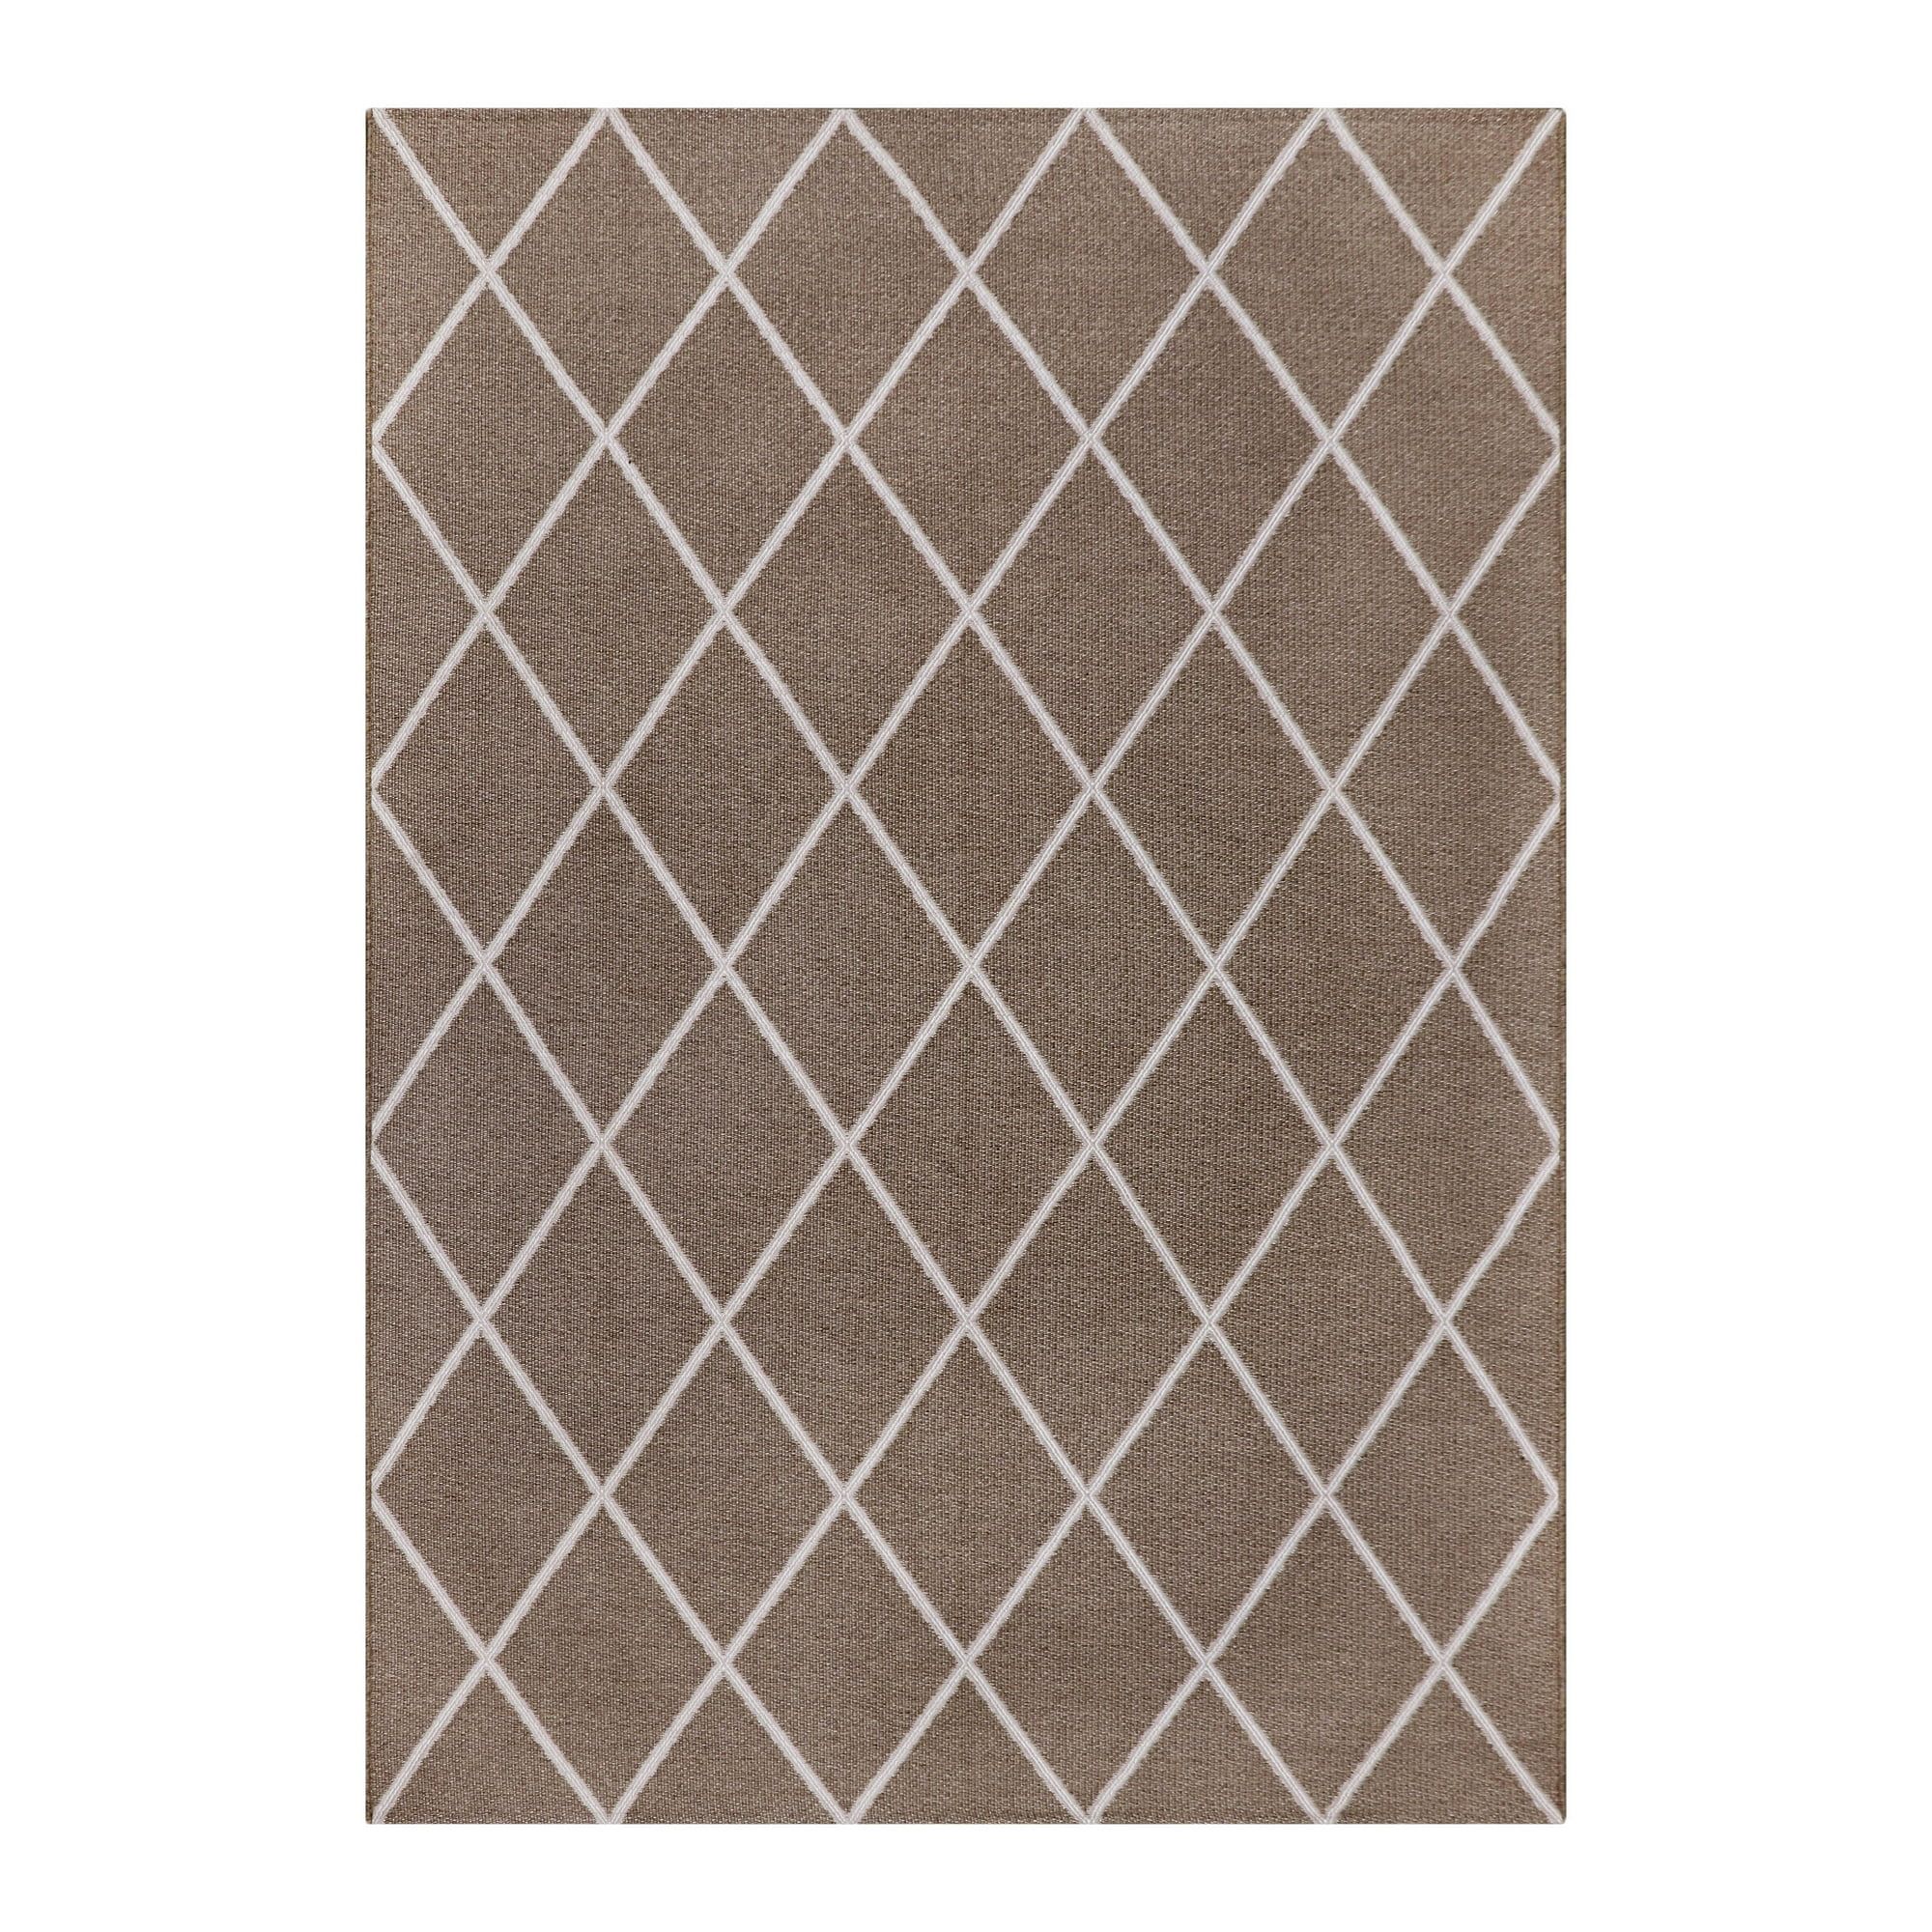 Better Homes & Gardens 5' X 7' Brown and White Diamond Outdoor Rug | Walmart (US)